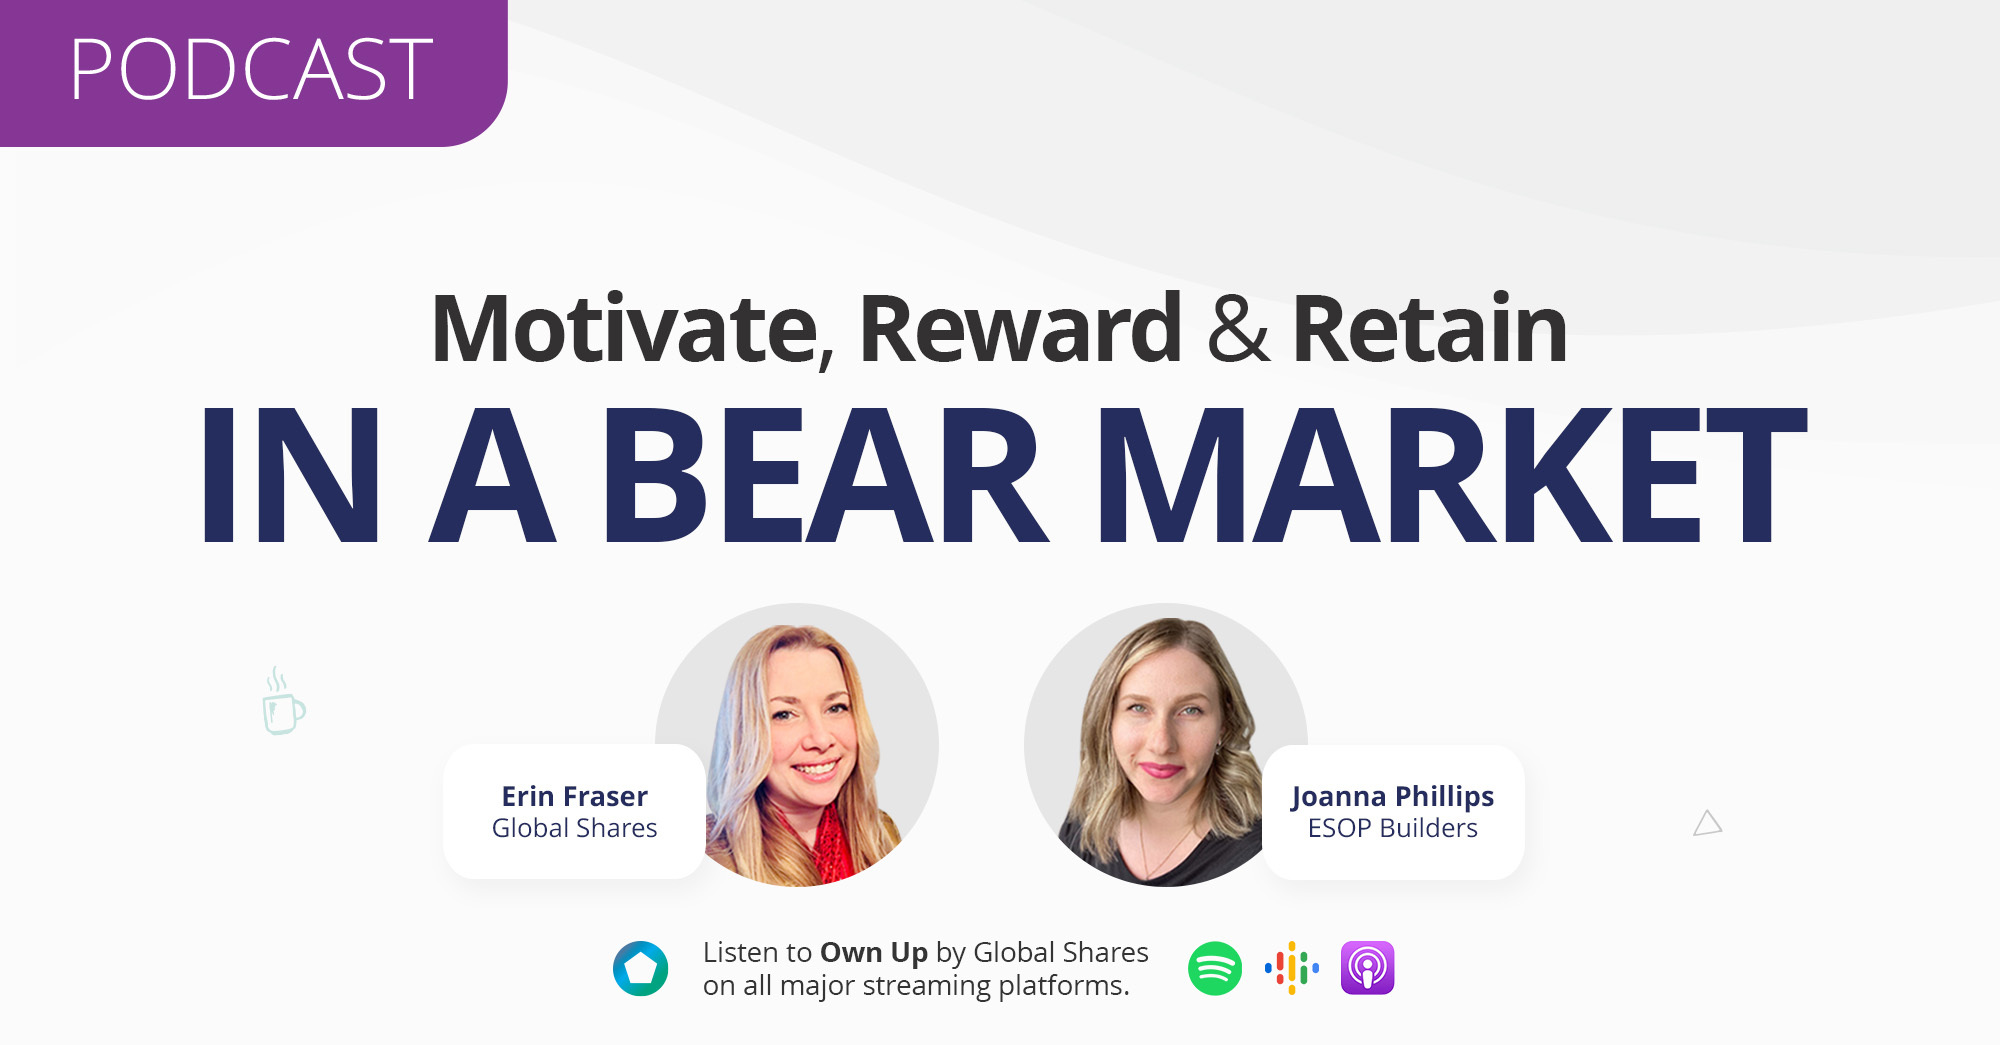 Ep17 Own Up Podcast: How to Motivate, Reward & Retain Employees in a Bear Market with Erin Fraser & Joanna Phillips